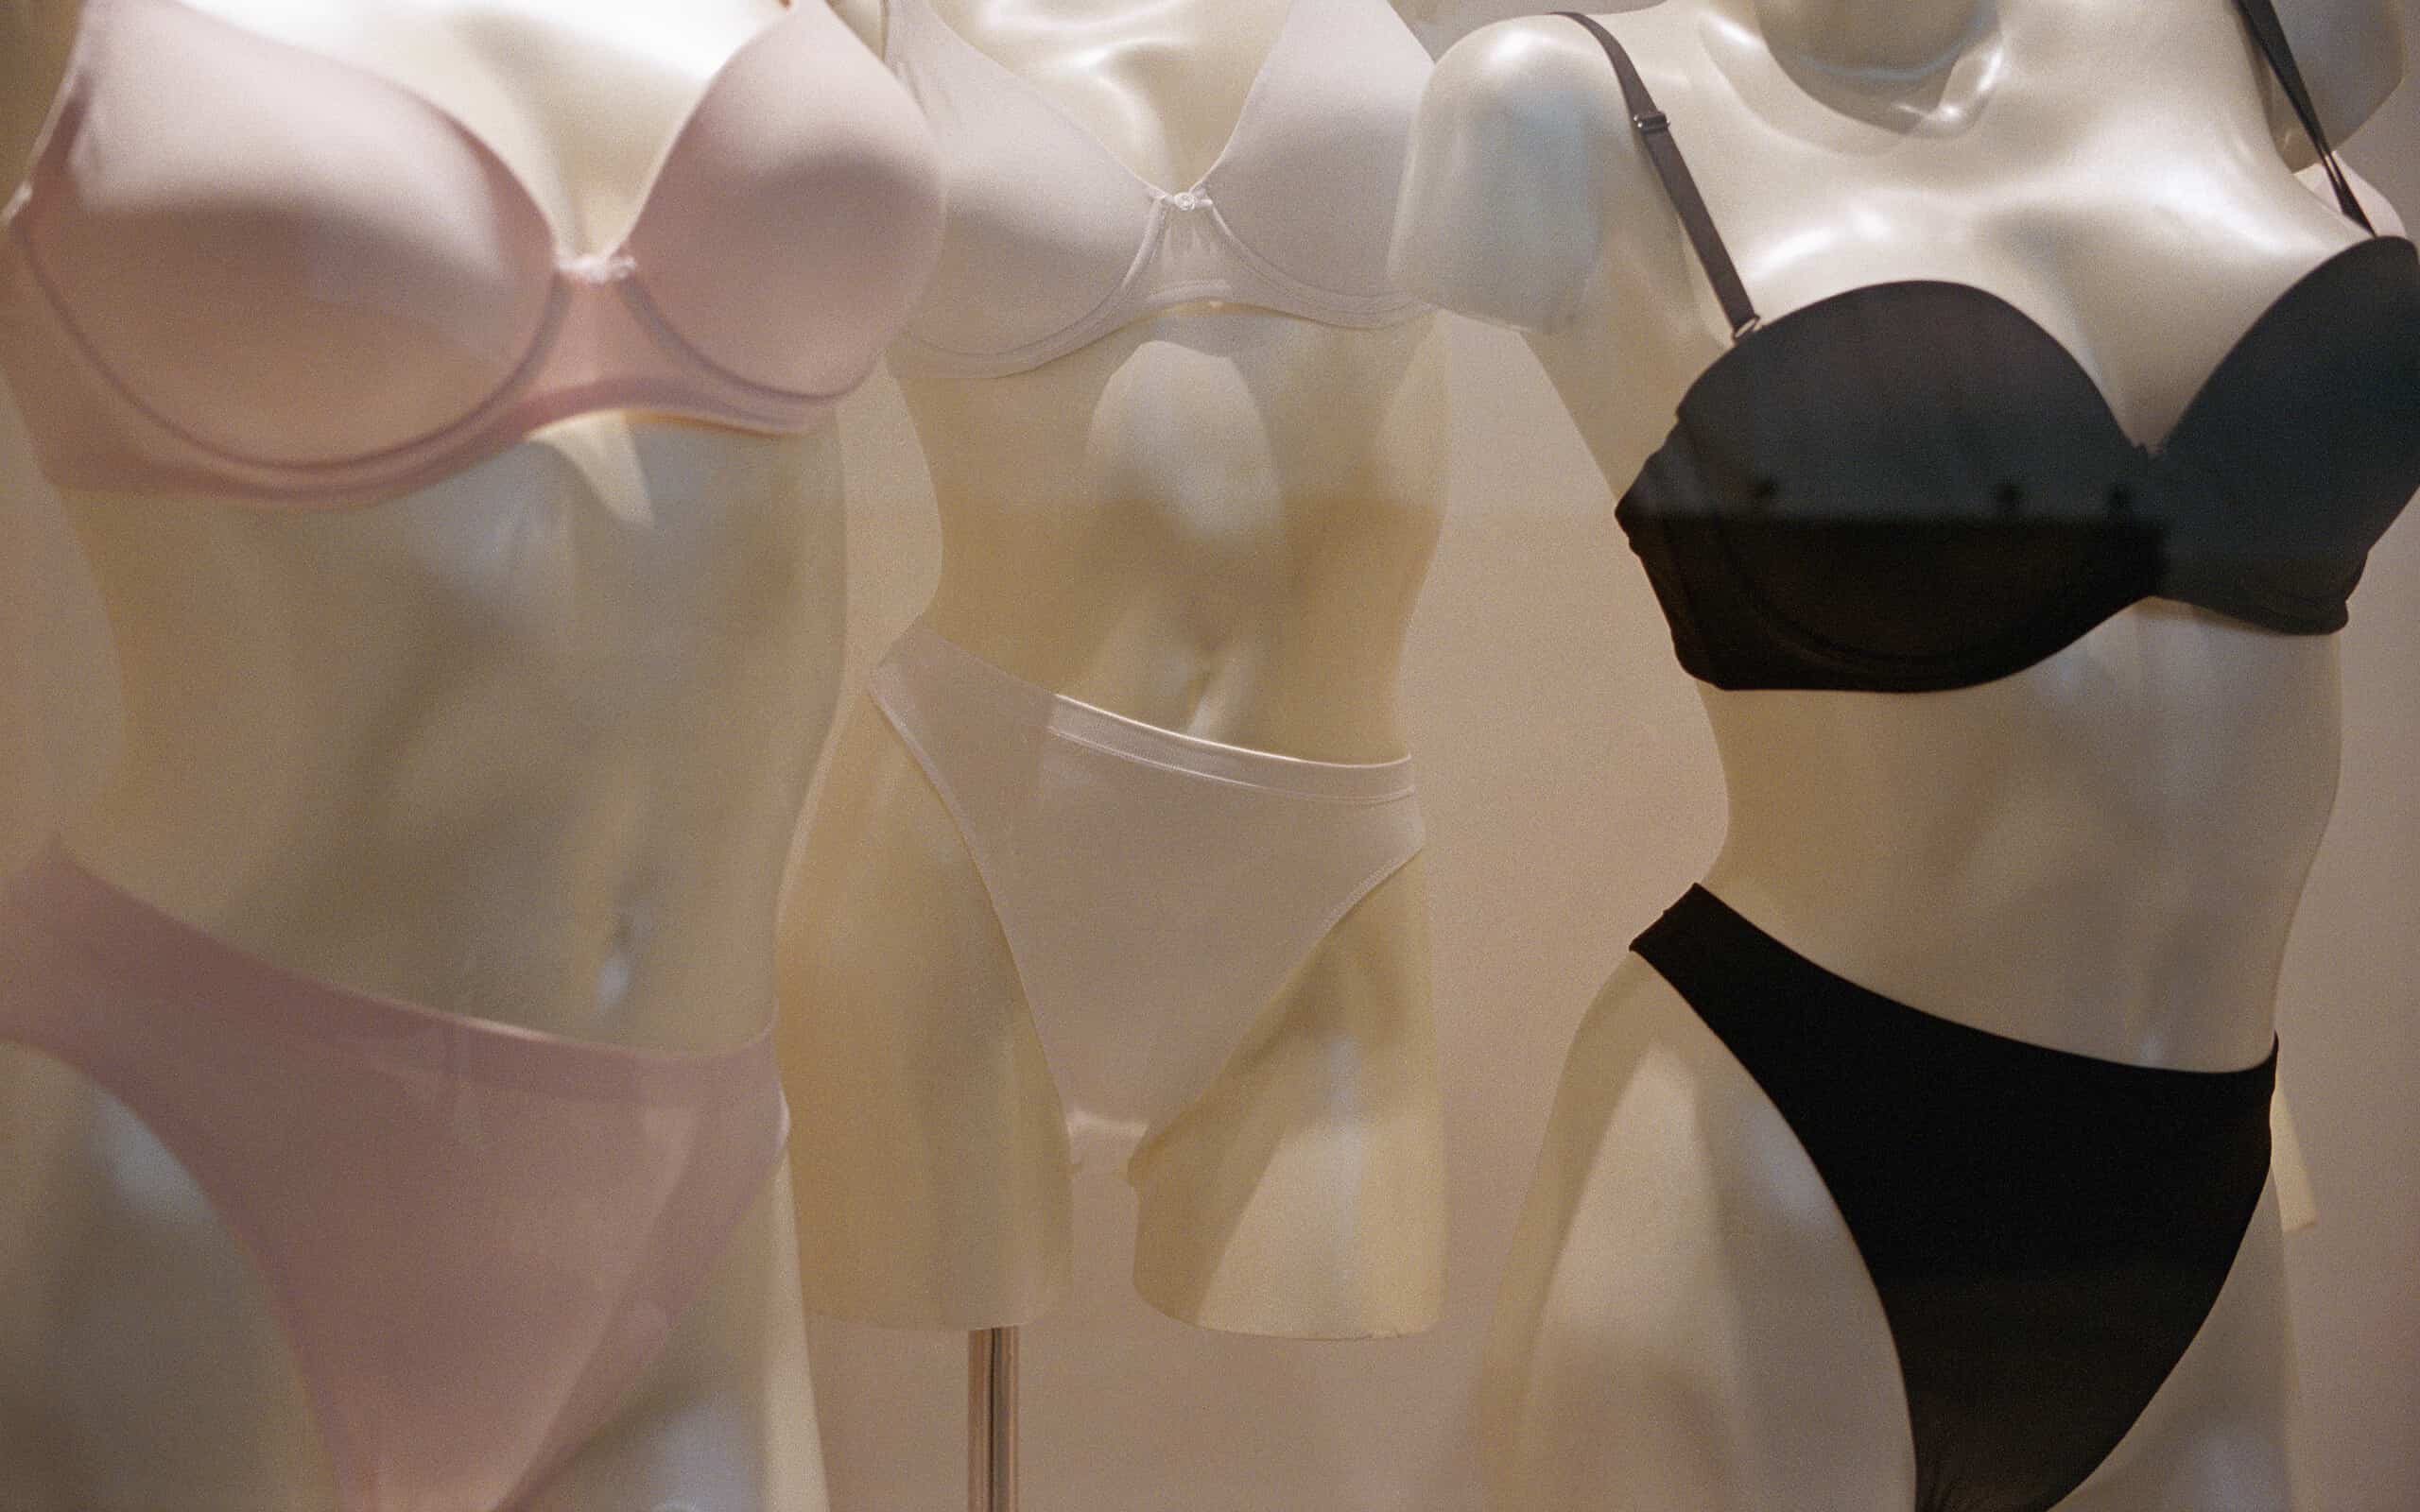 Mannequin wearing bra and panties, close-up